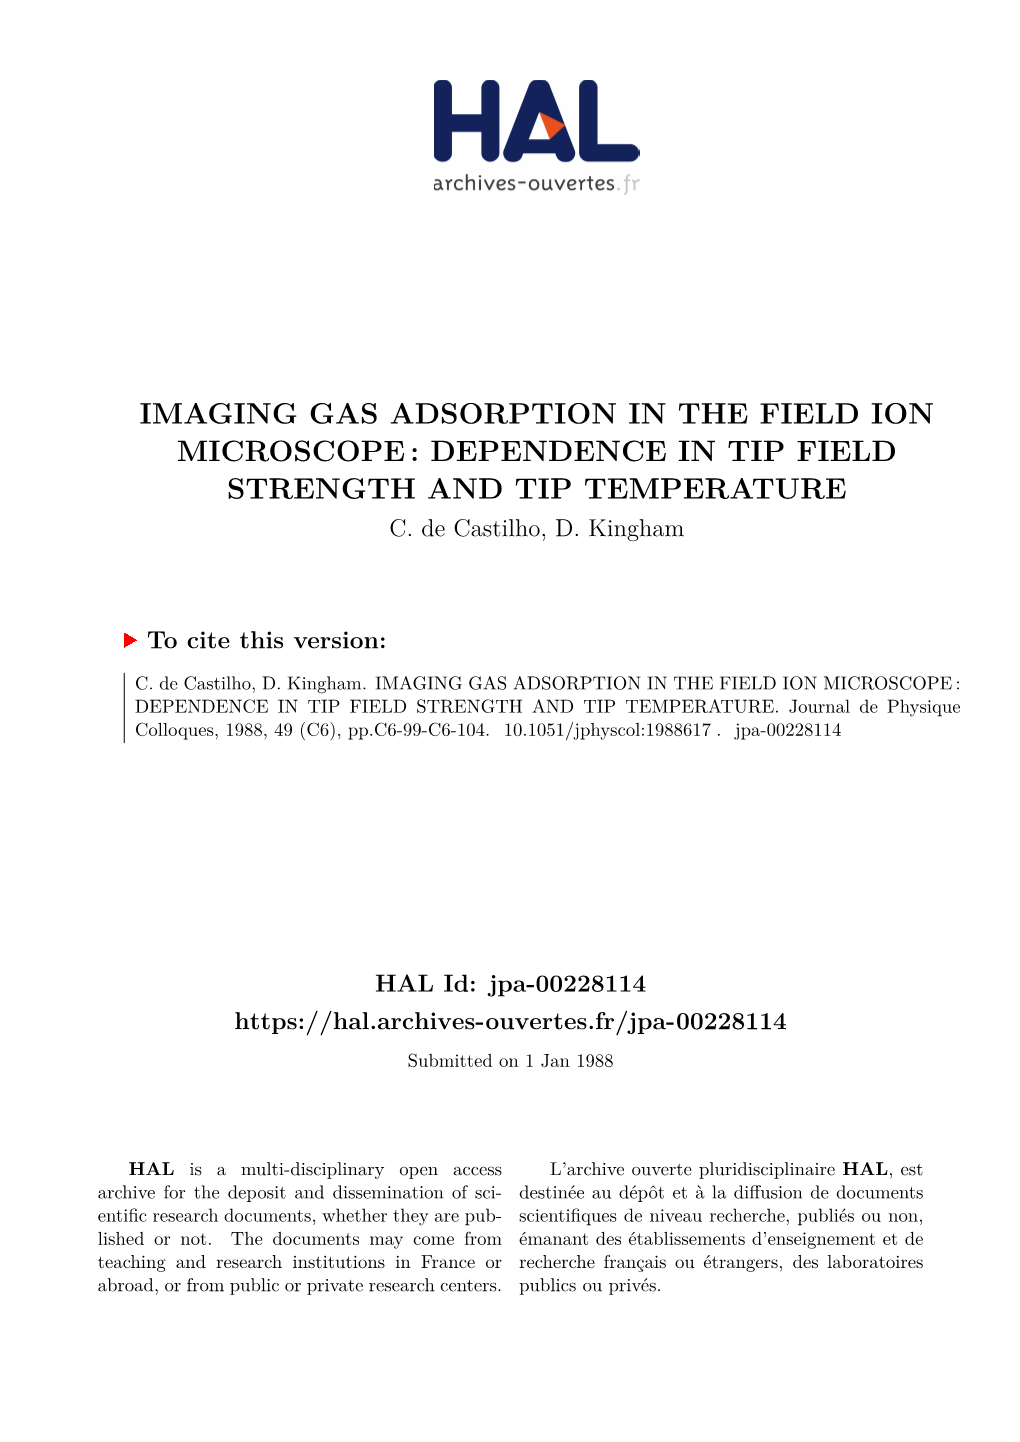 Imaging Gas Adsorption in the Field Ion Microscope : Dependence in Tip Field Strength and Tip Temperature C